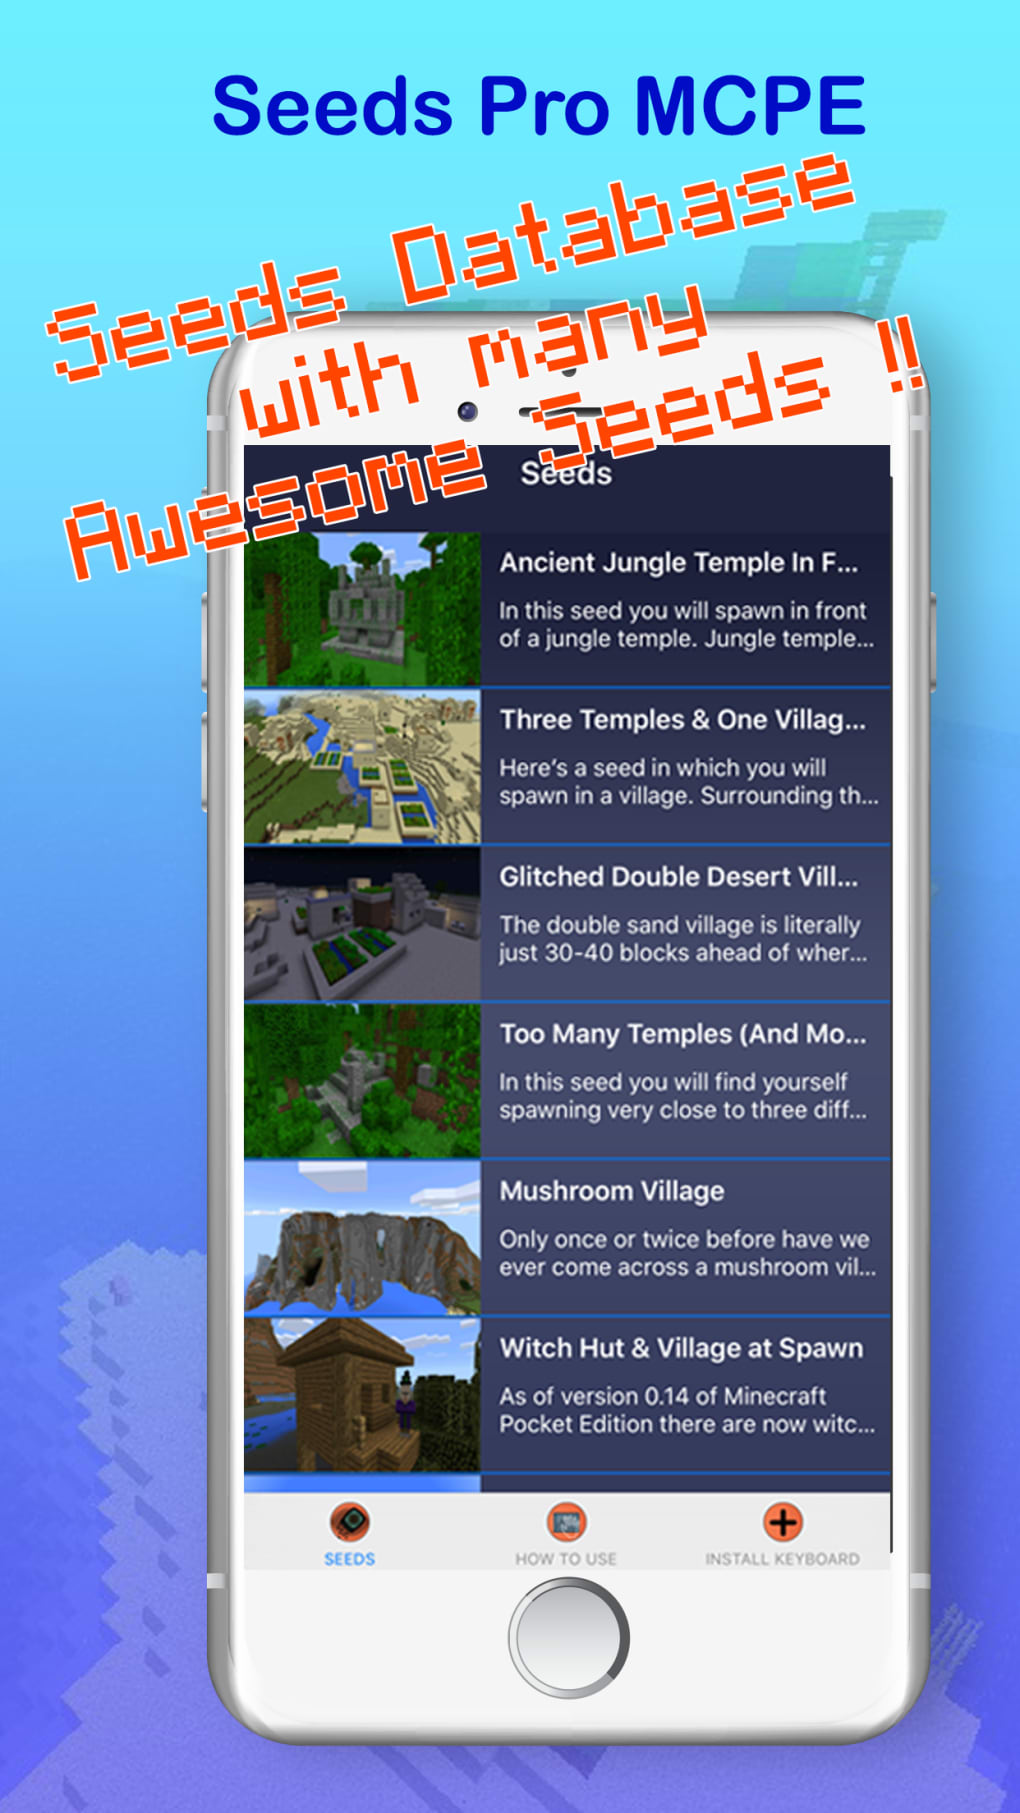 Seeds Pe Free Maps Worlds For Minecraft Pocket Edition For Iphone Download 1460